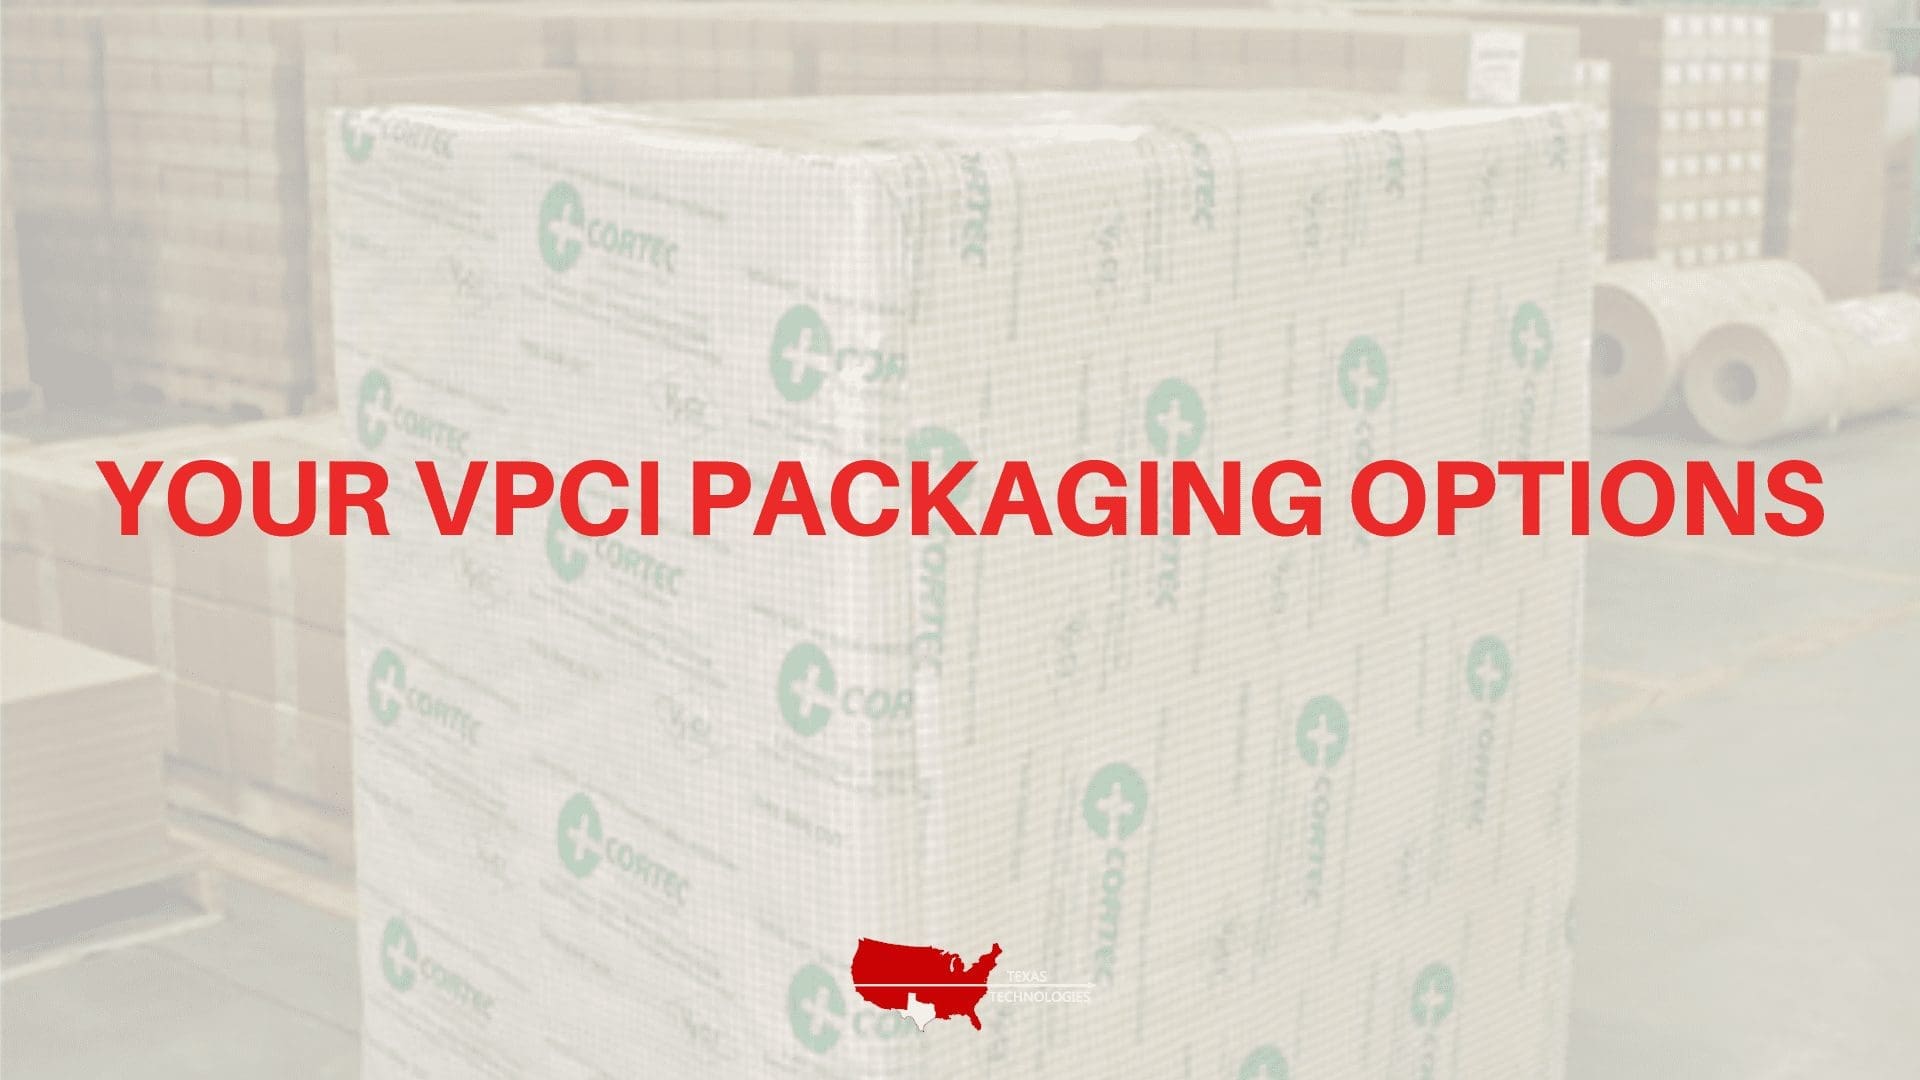 Your VpCI Packaging Options